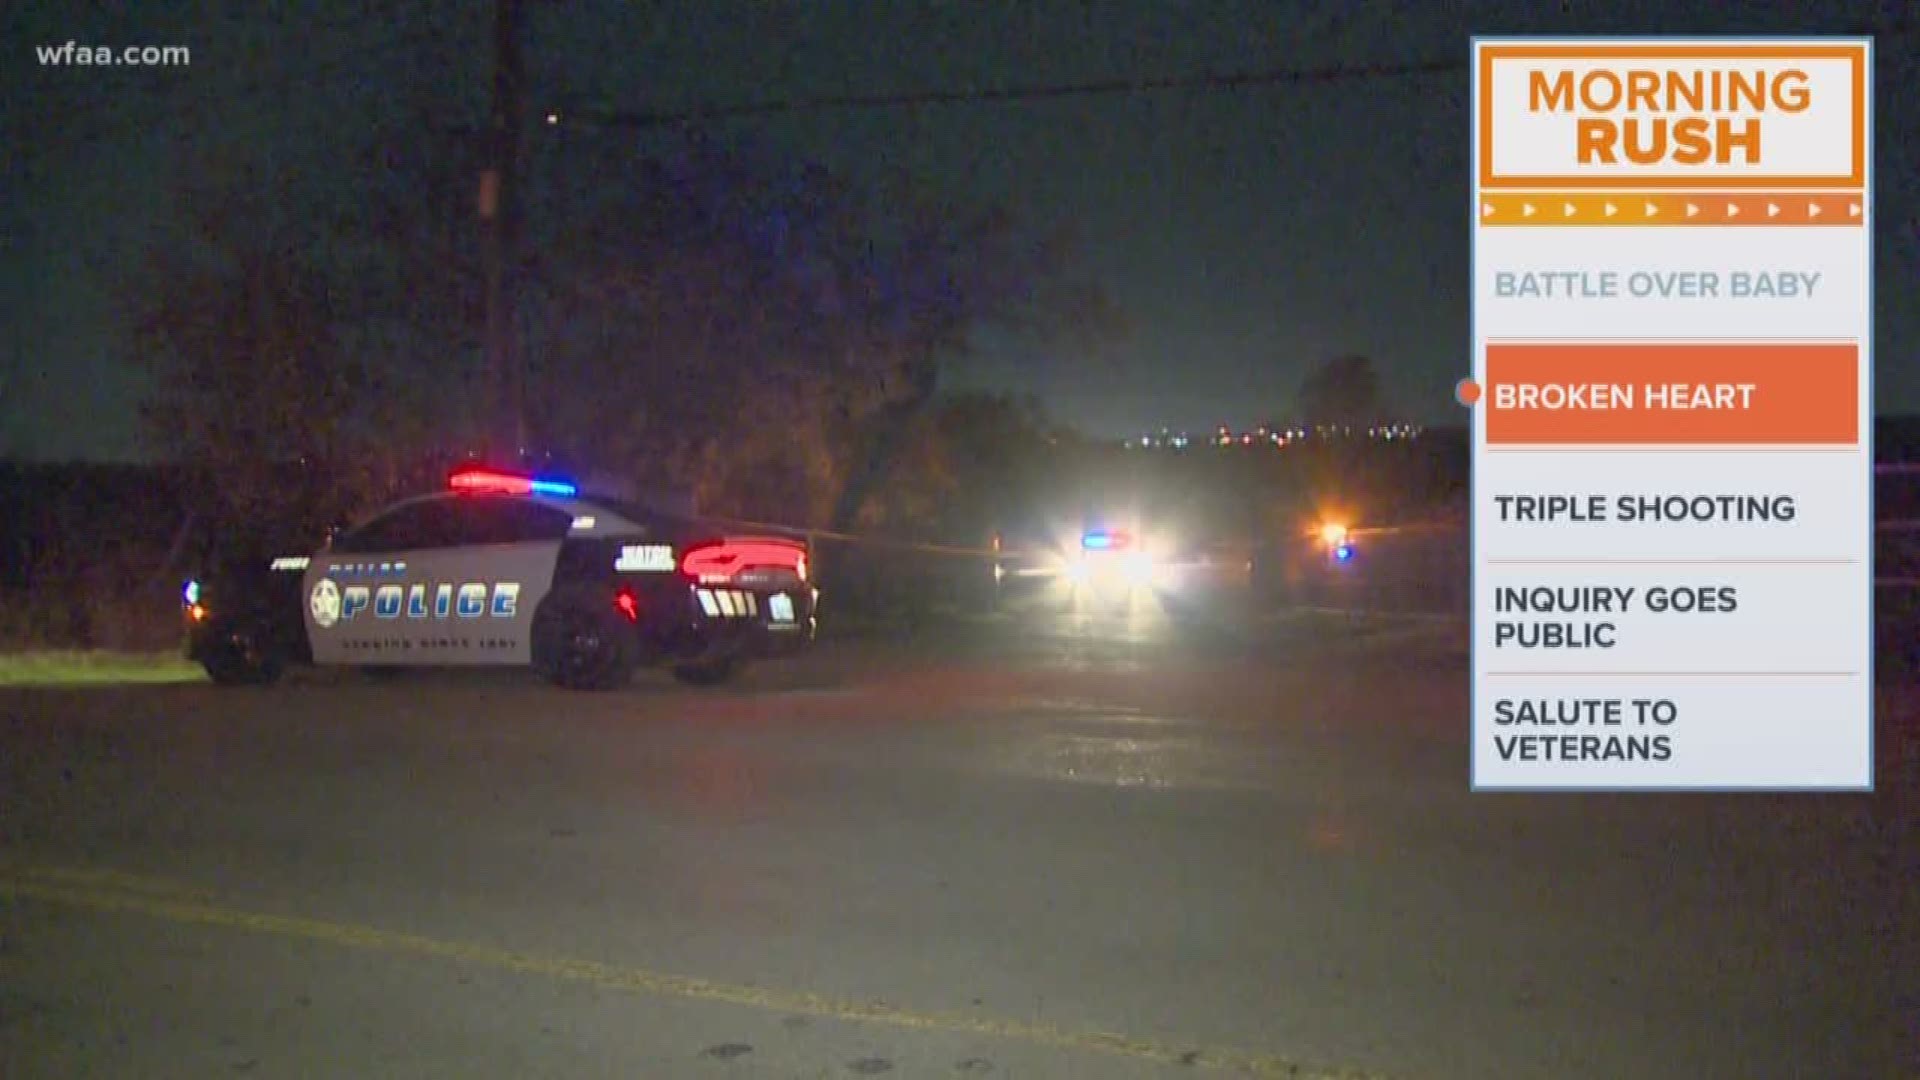 Two men were shot and killed and one man was injured in a shooting near West Dallas on Sunday night.